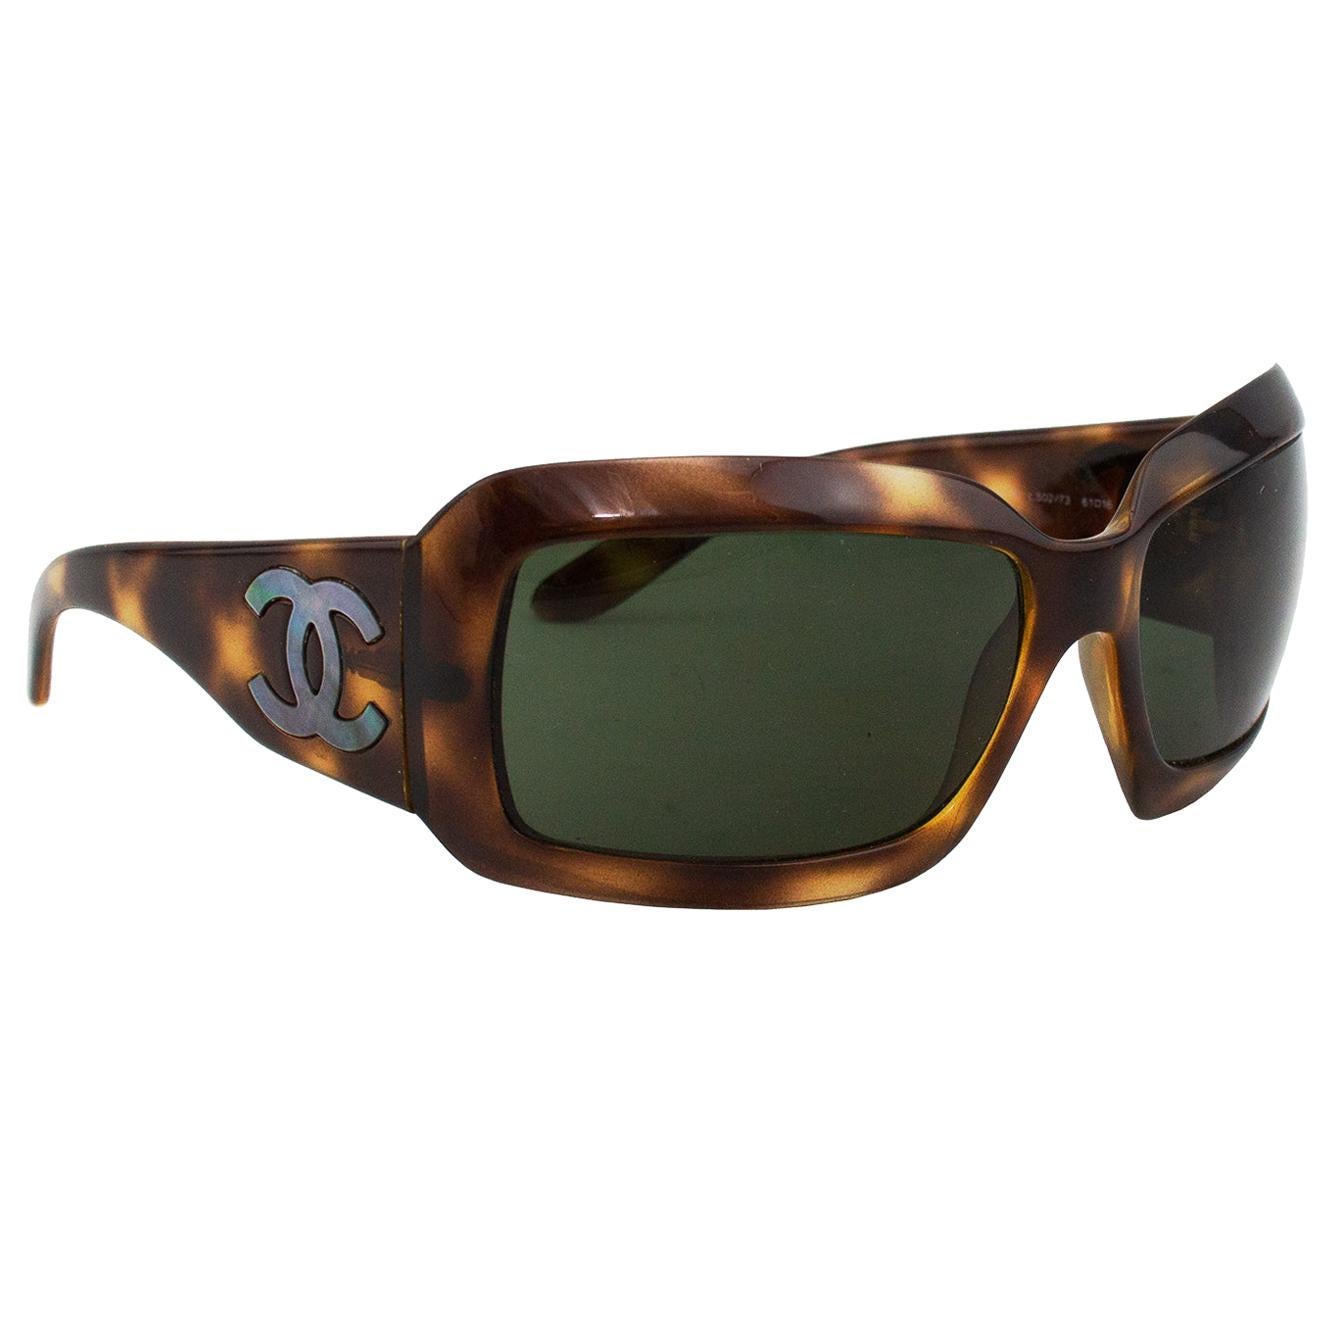 Early 2000s Chanel Tortoise Shell Sunglasses at 1stDibs